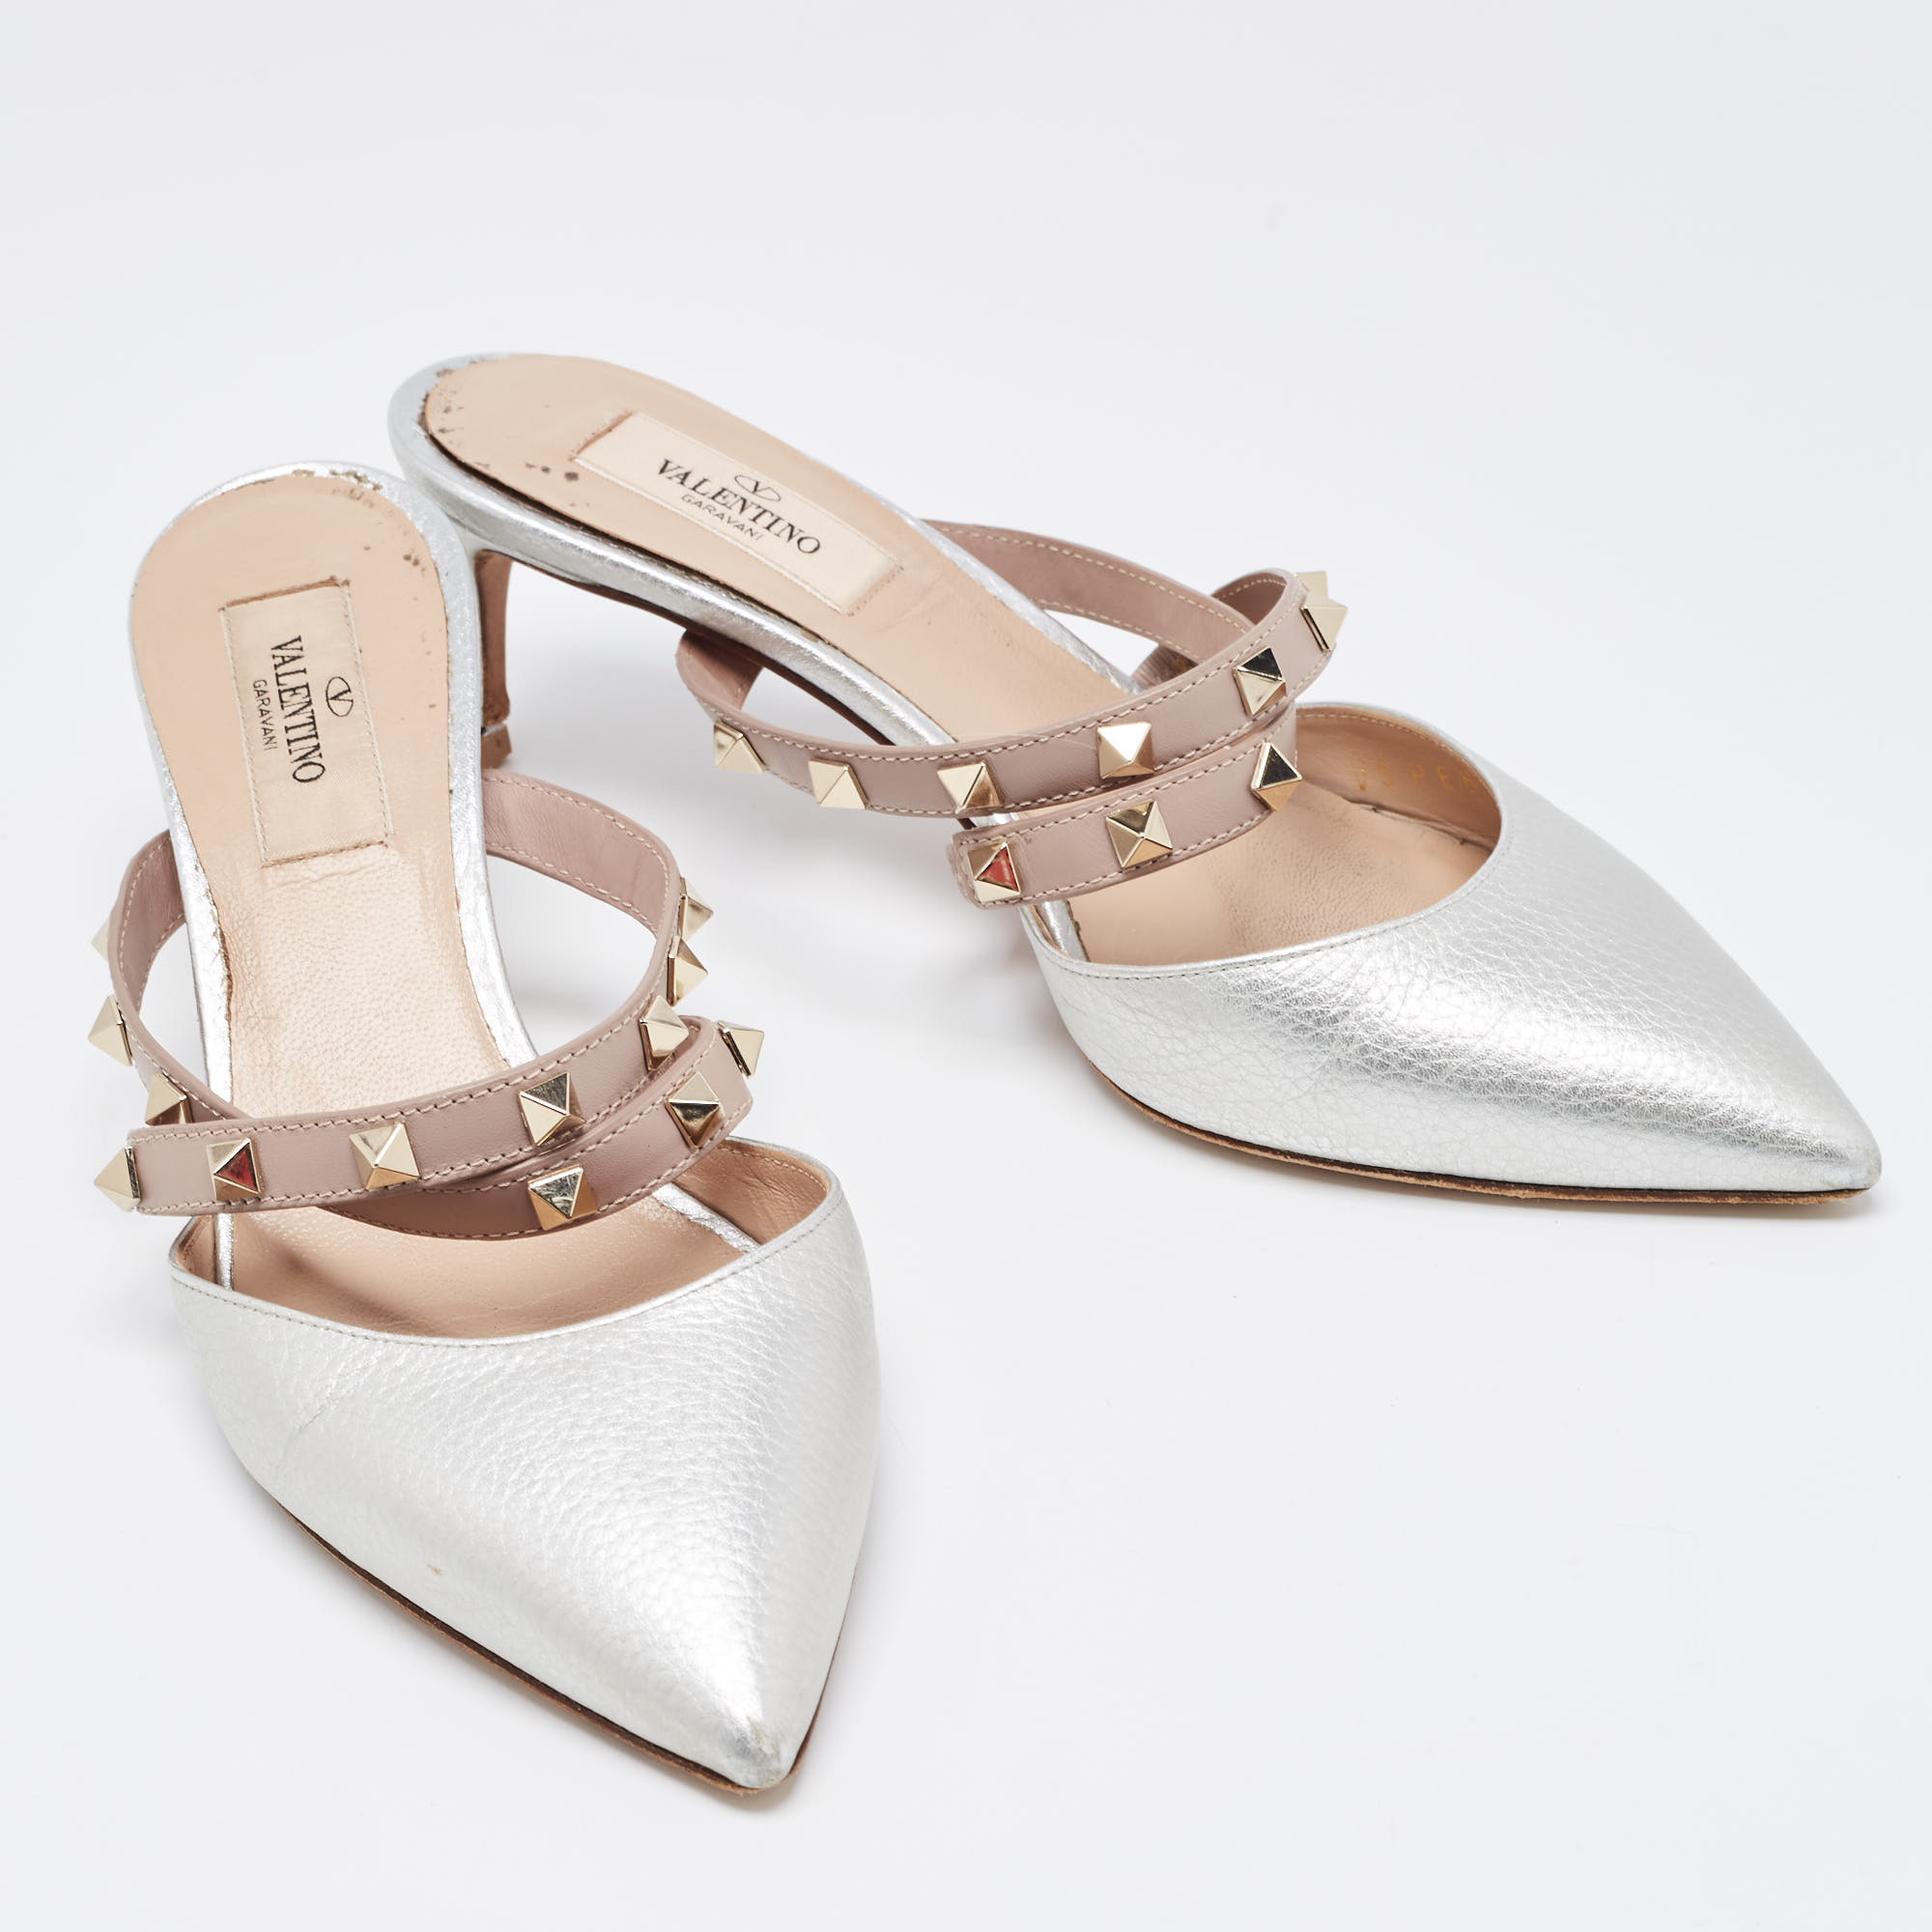 Valentino Silver/Beige Leather Rockstud Mules Size 37